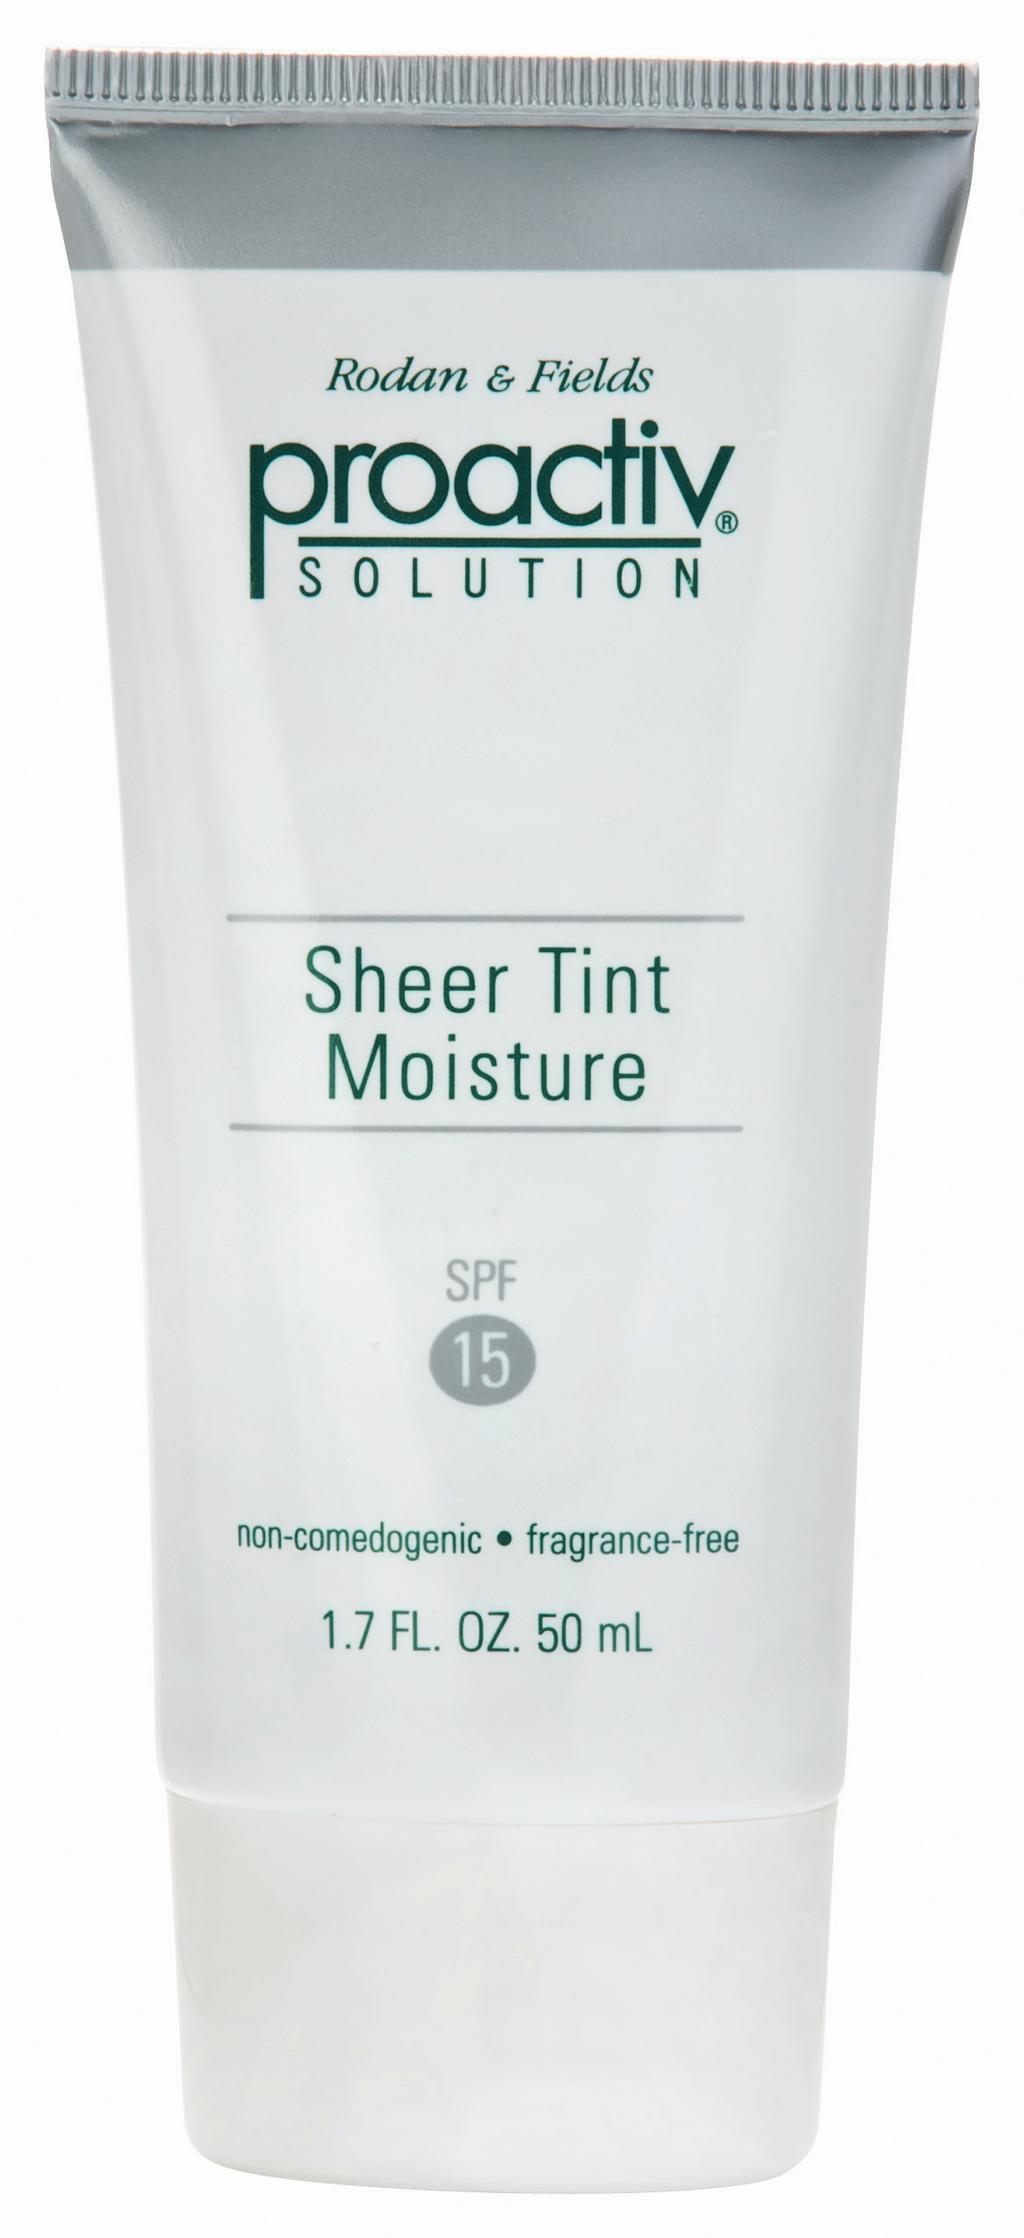 Oil Free Moisture Sheer Tint Moisture Katy Perry Dry skin, sun exposure and uneven skin tone. Singer/Songwriter The Oil Free Moisture with SPF 15 is fantastic.